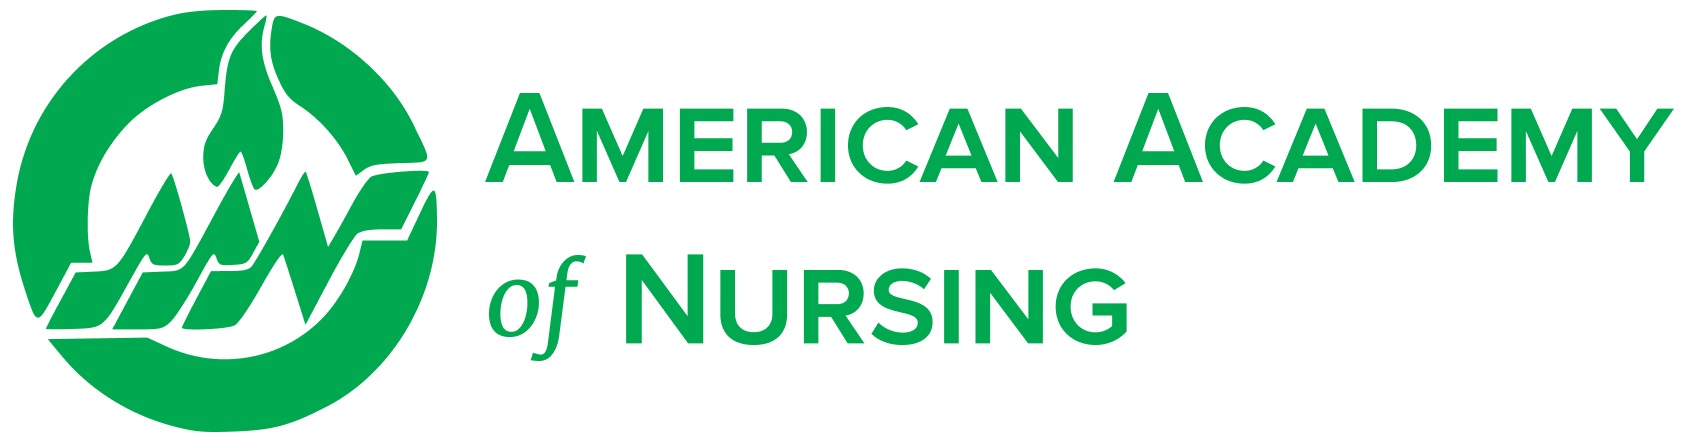 Dr. Jennifer Doering selected to be inducted as a Fellow of the American Academy of Nursing